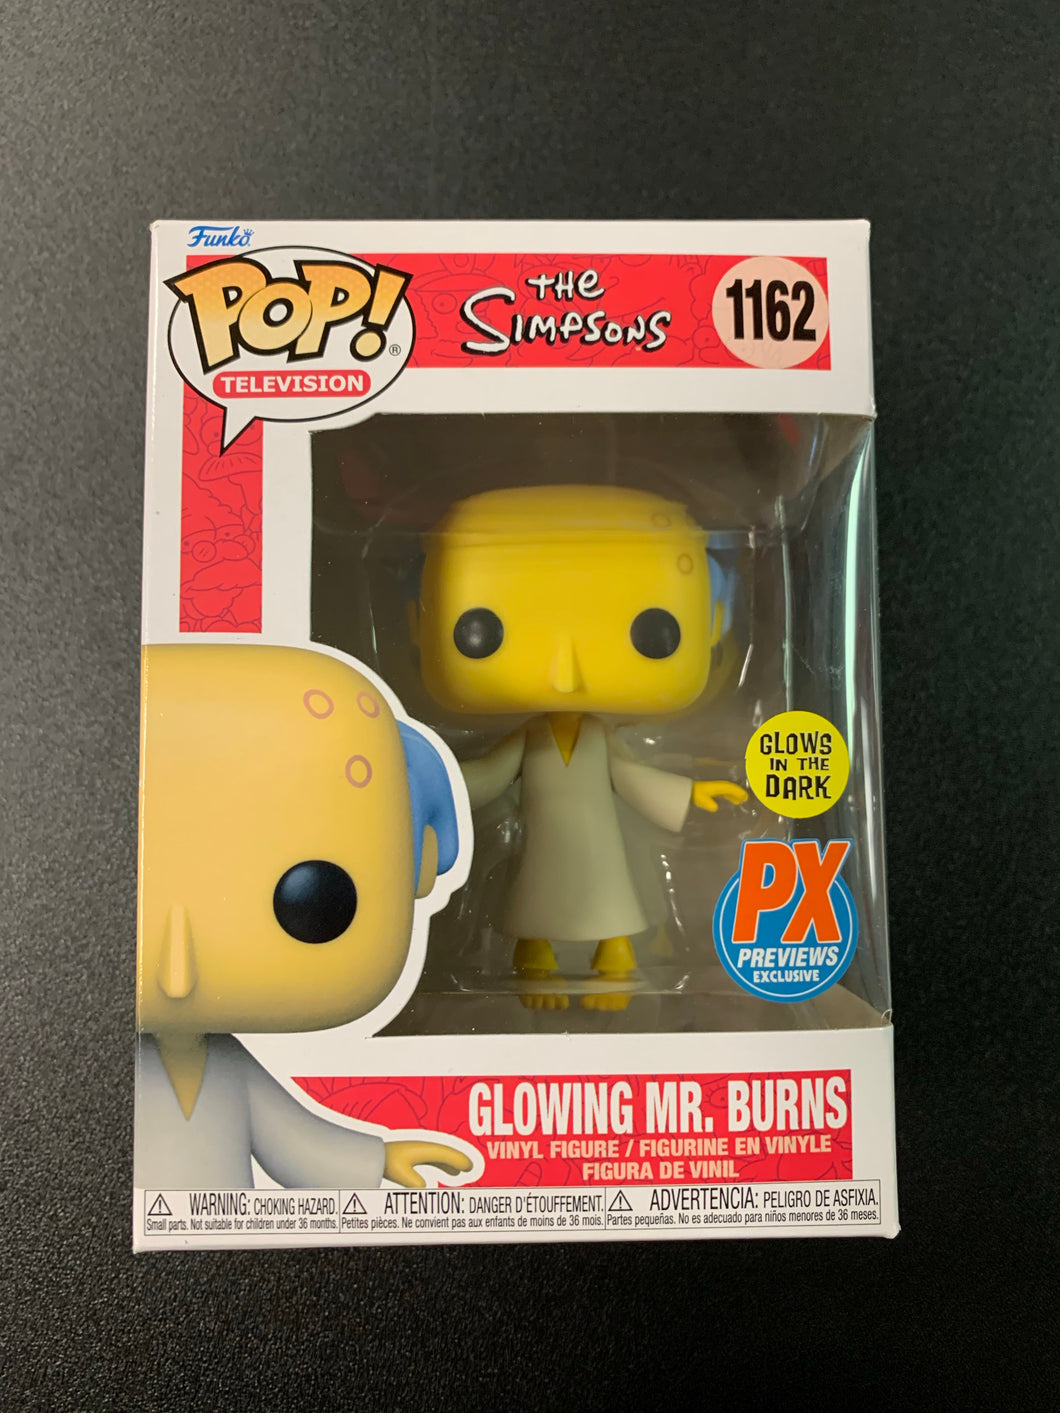 FUNKO POP TELEVISION THE SIMPSONS GLOWING MR. BURNS PX PREVIEWS EXCLUSIVE 1162